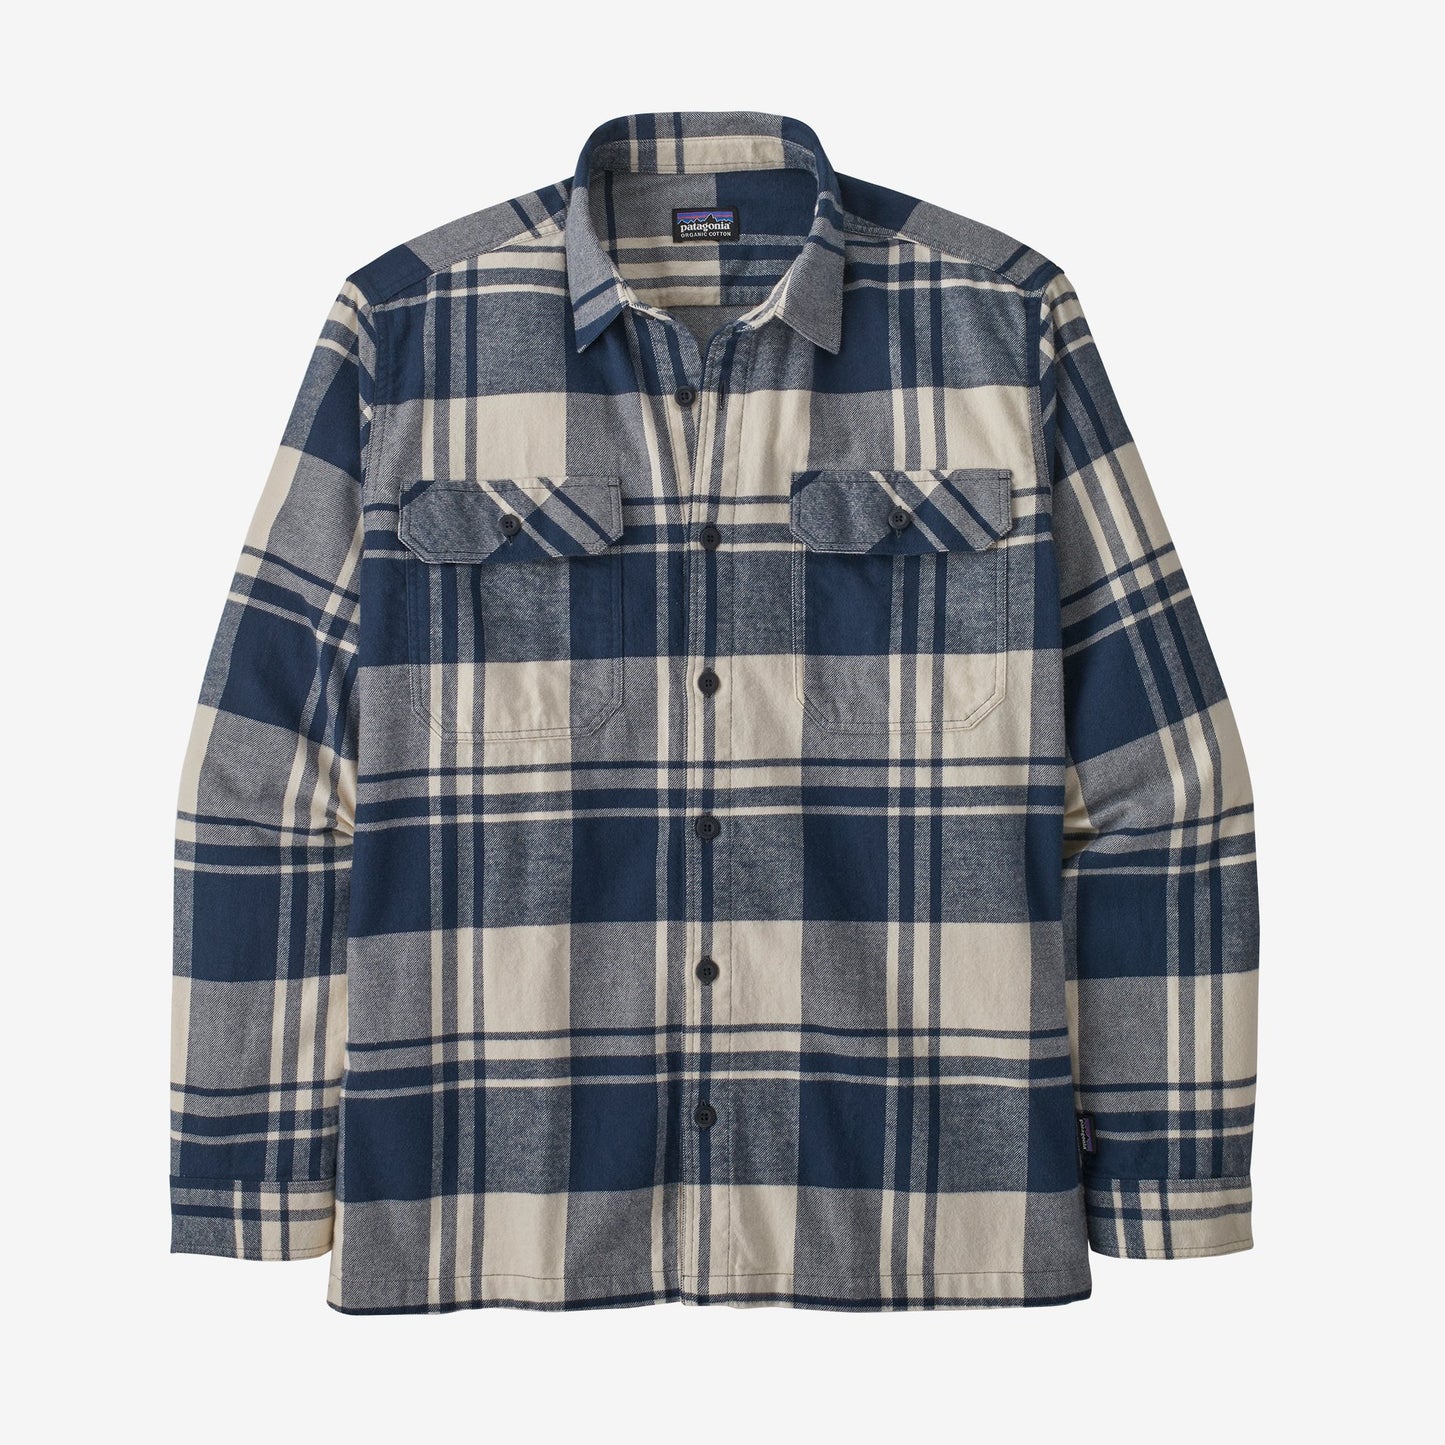 Chemise Patagonia Homme M'S l/S Organic cotton FJORD FLANNEL